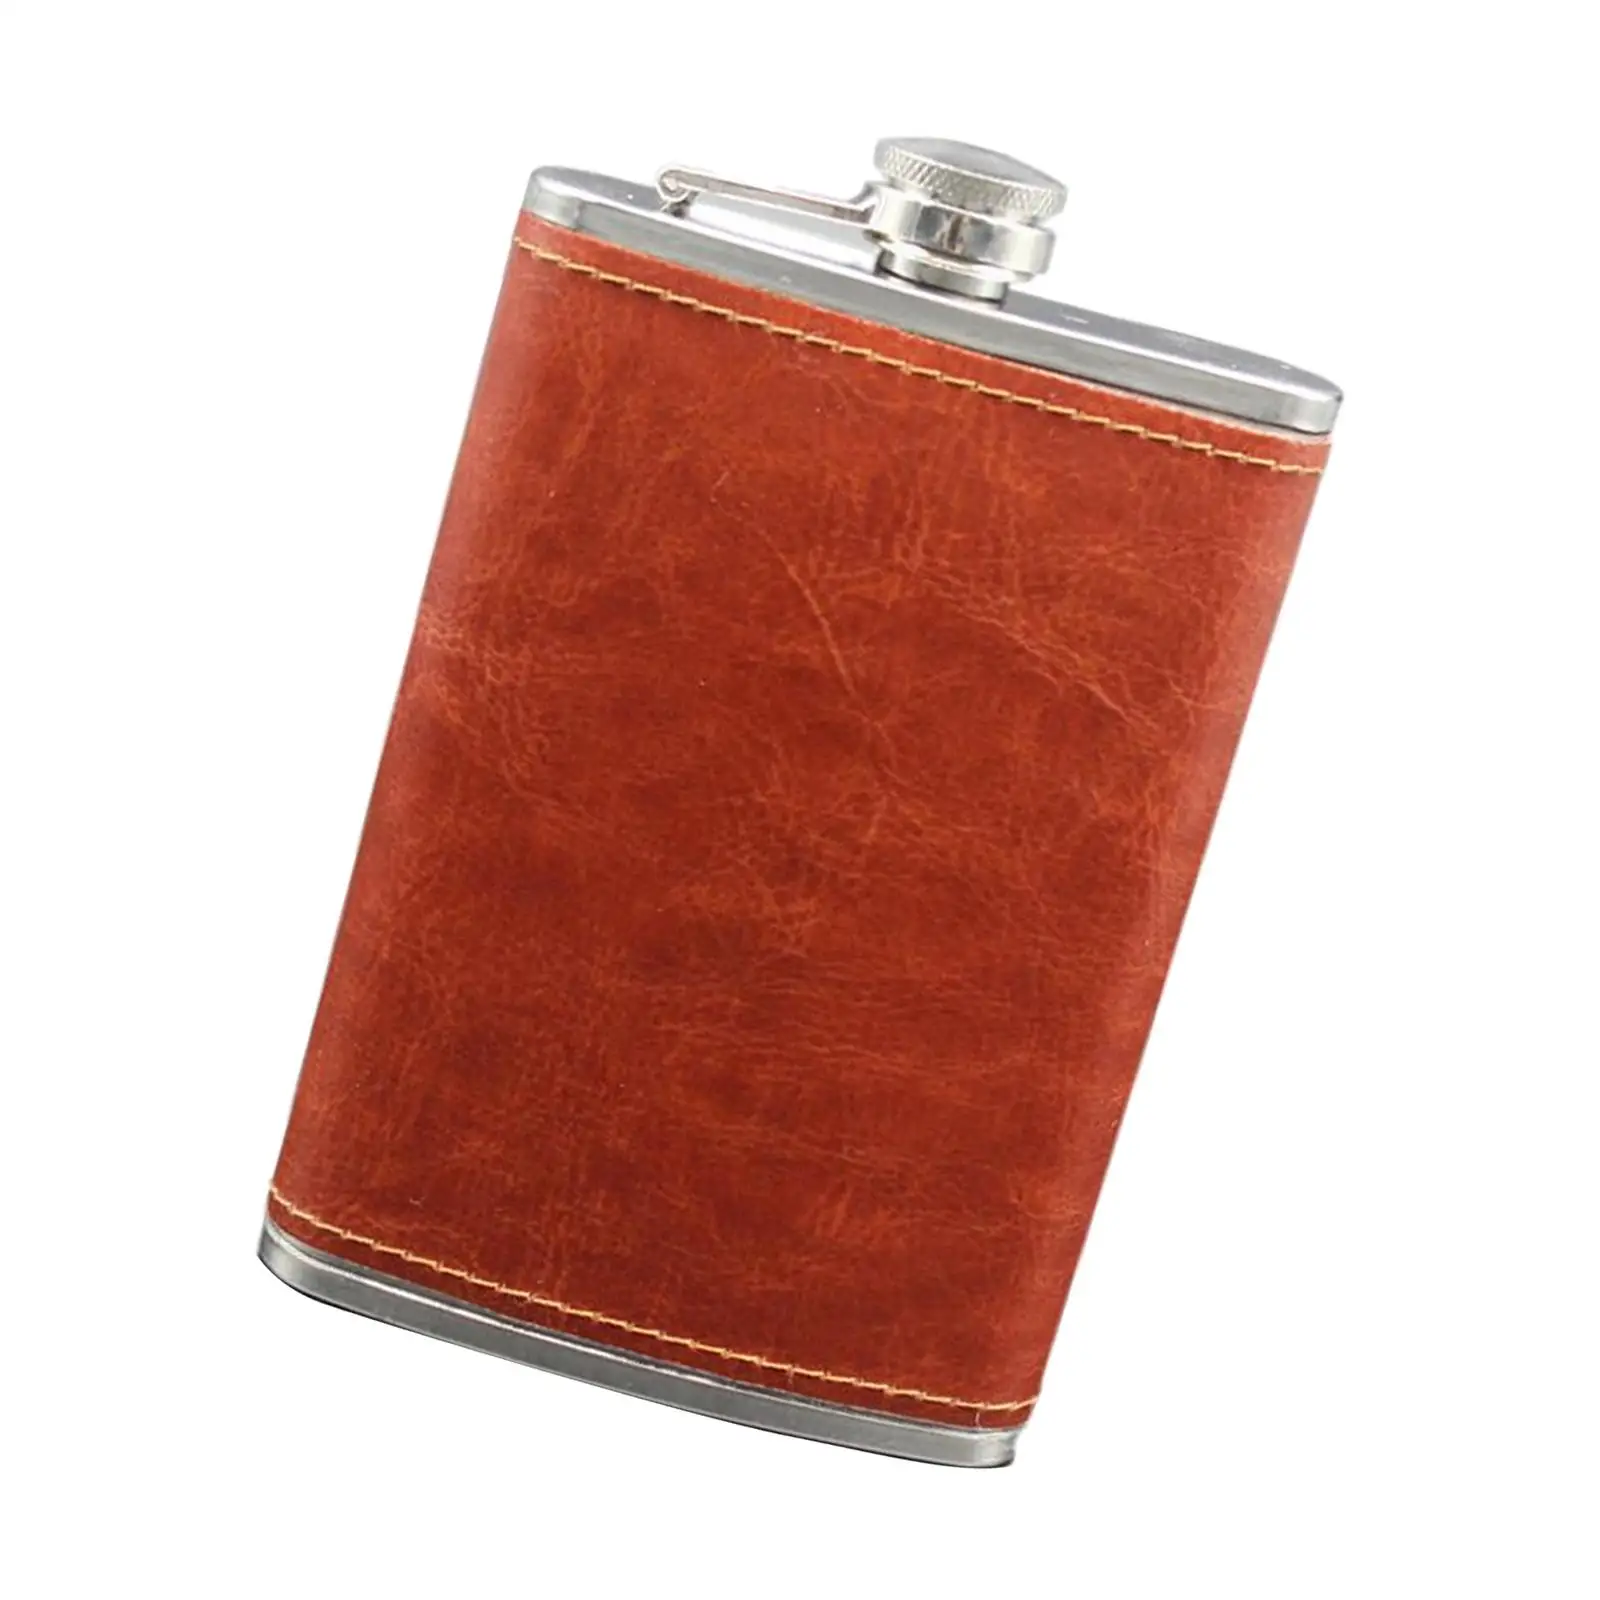 9 oz Hip Flask Portable Liquor Pocket for Hiking Home Goods Clear Water for Storing